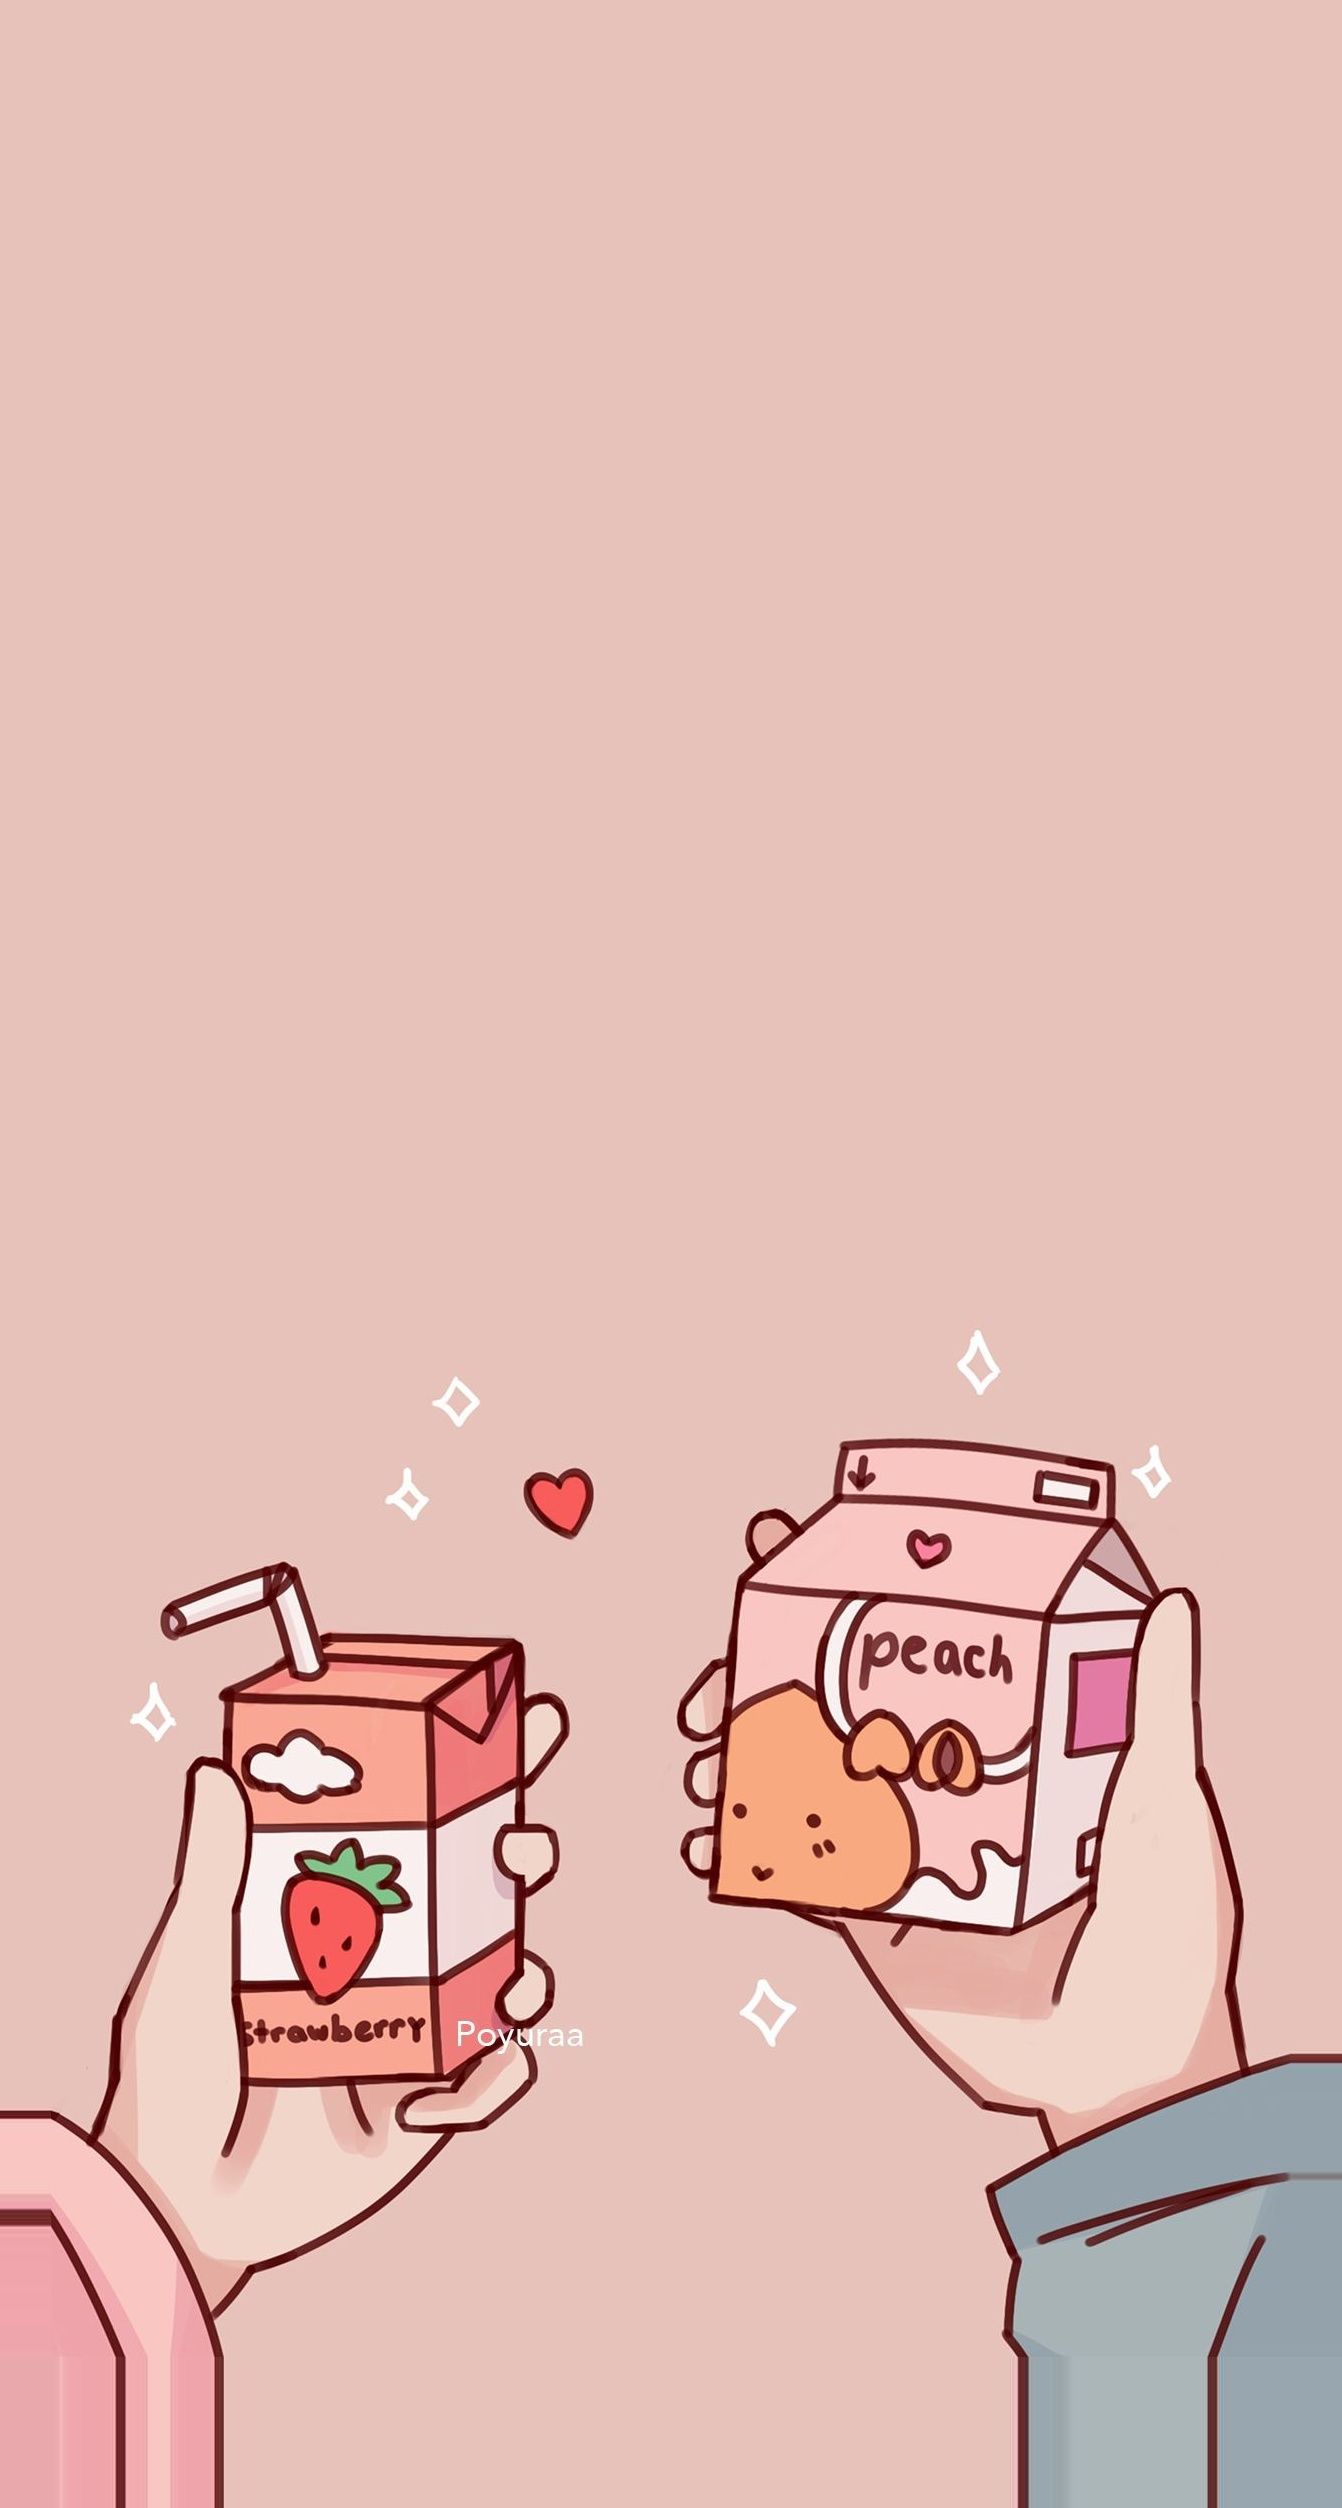 Aesthetic background of two hands holding strawberry and peach milk cartons - Milk, boba, strawberry, kawaii